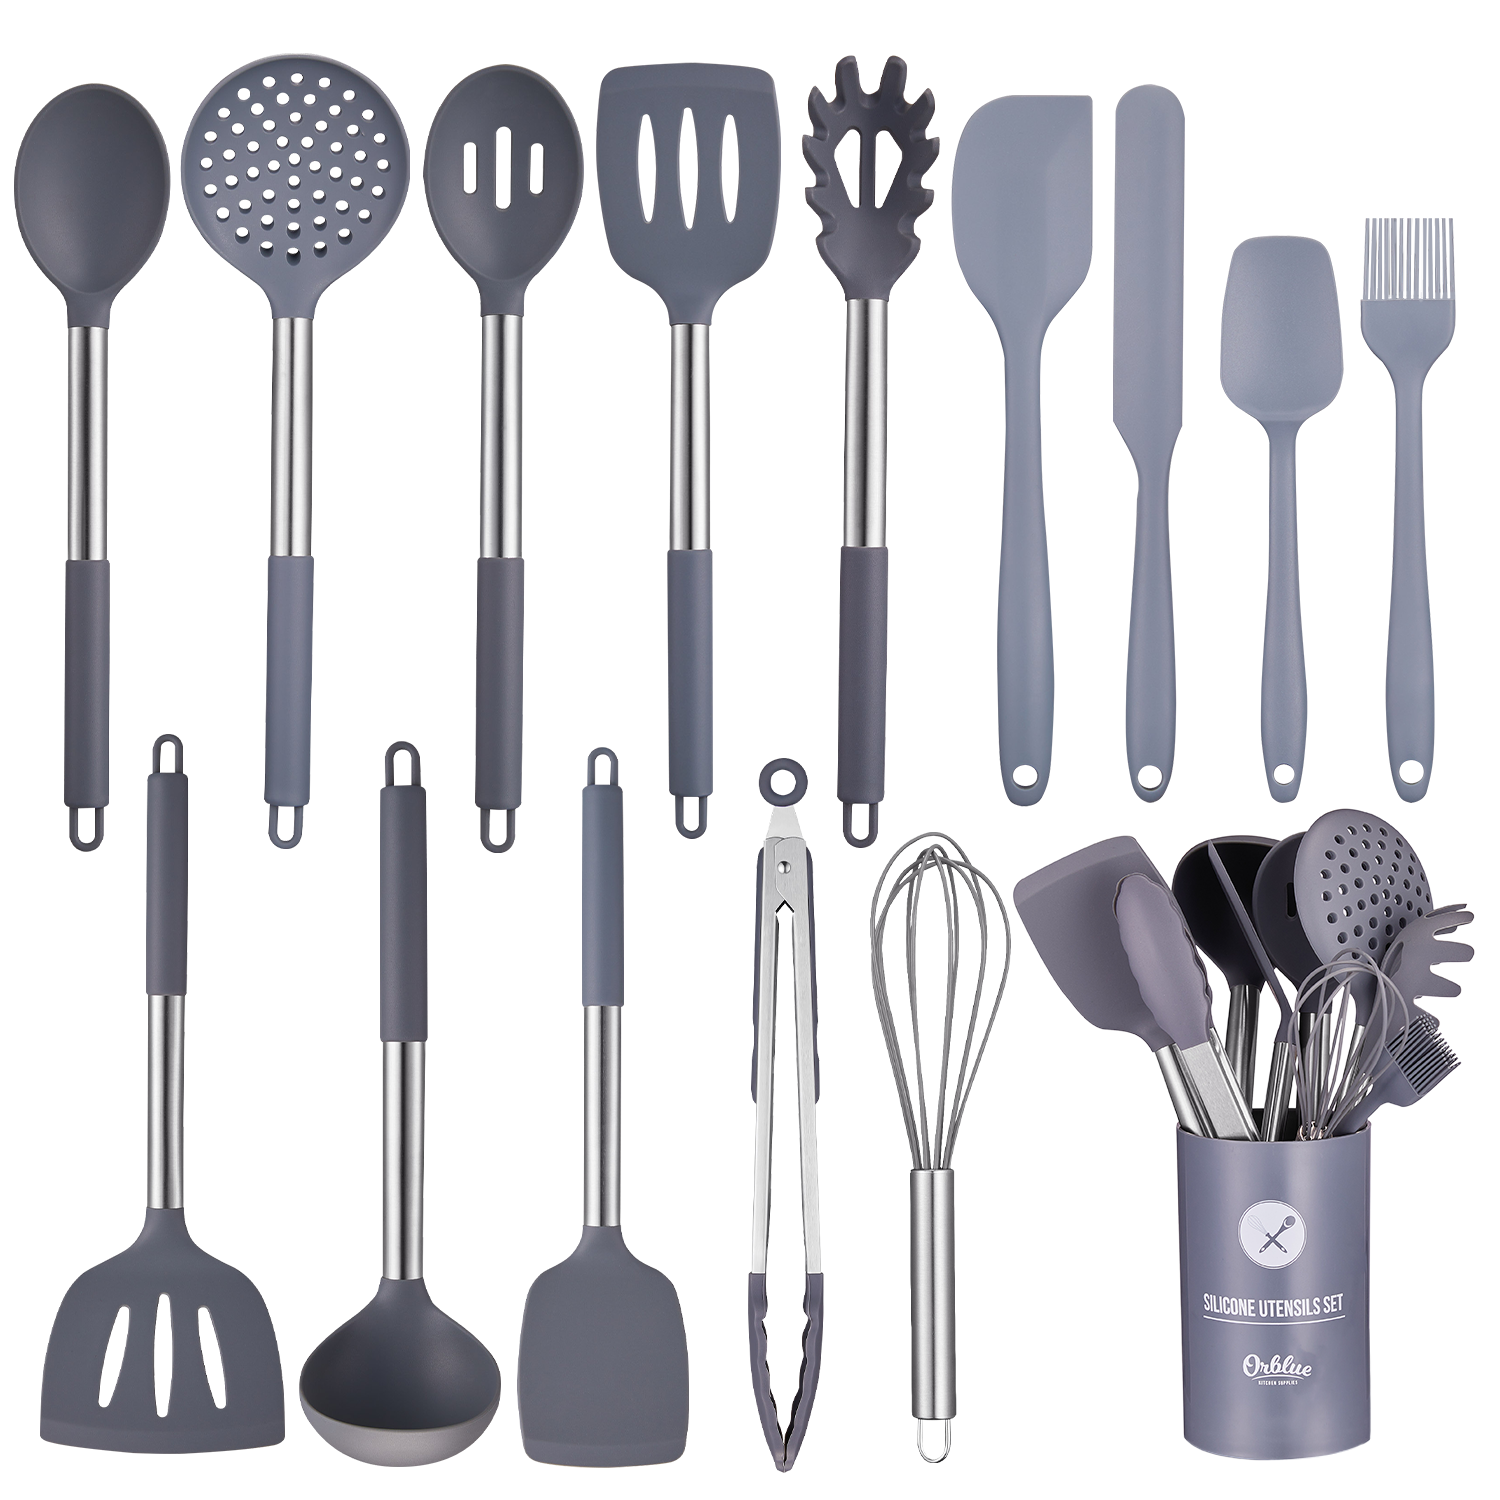 Orblue Silicone Cooking Utensil Set, 14-Piece Kitchen Utensils with Holder,  Safe Food-Grade Silicone Heads and Stainless Steel Handles with Heat-Proof  Silicone Handle Covers, Gray 